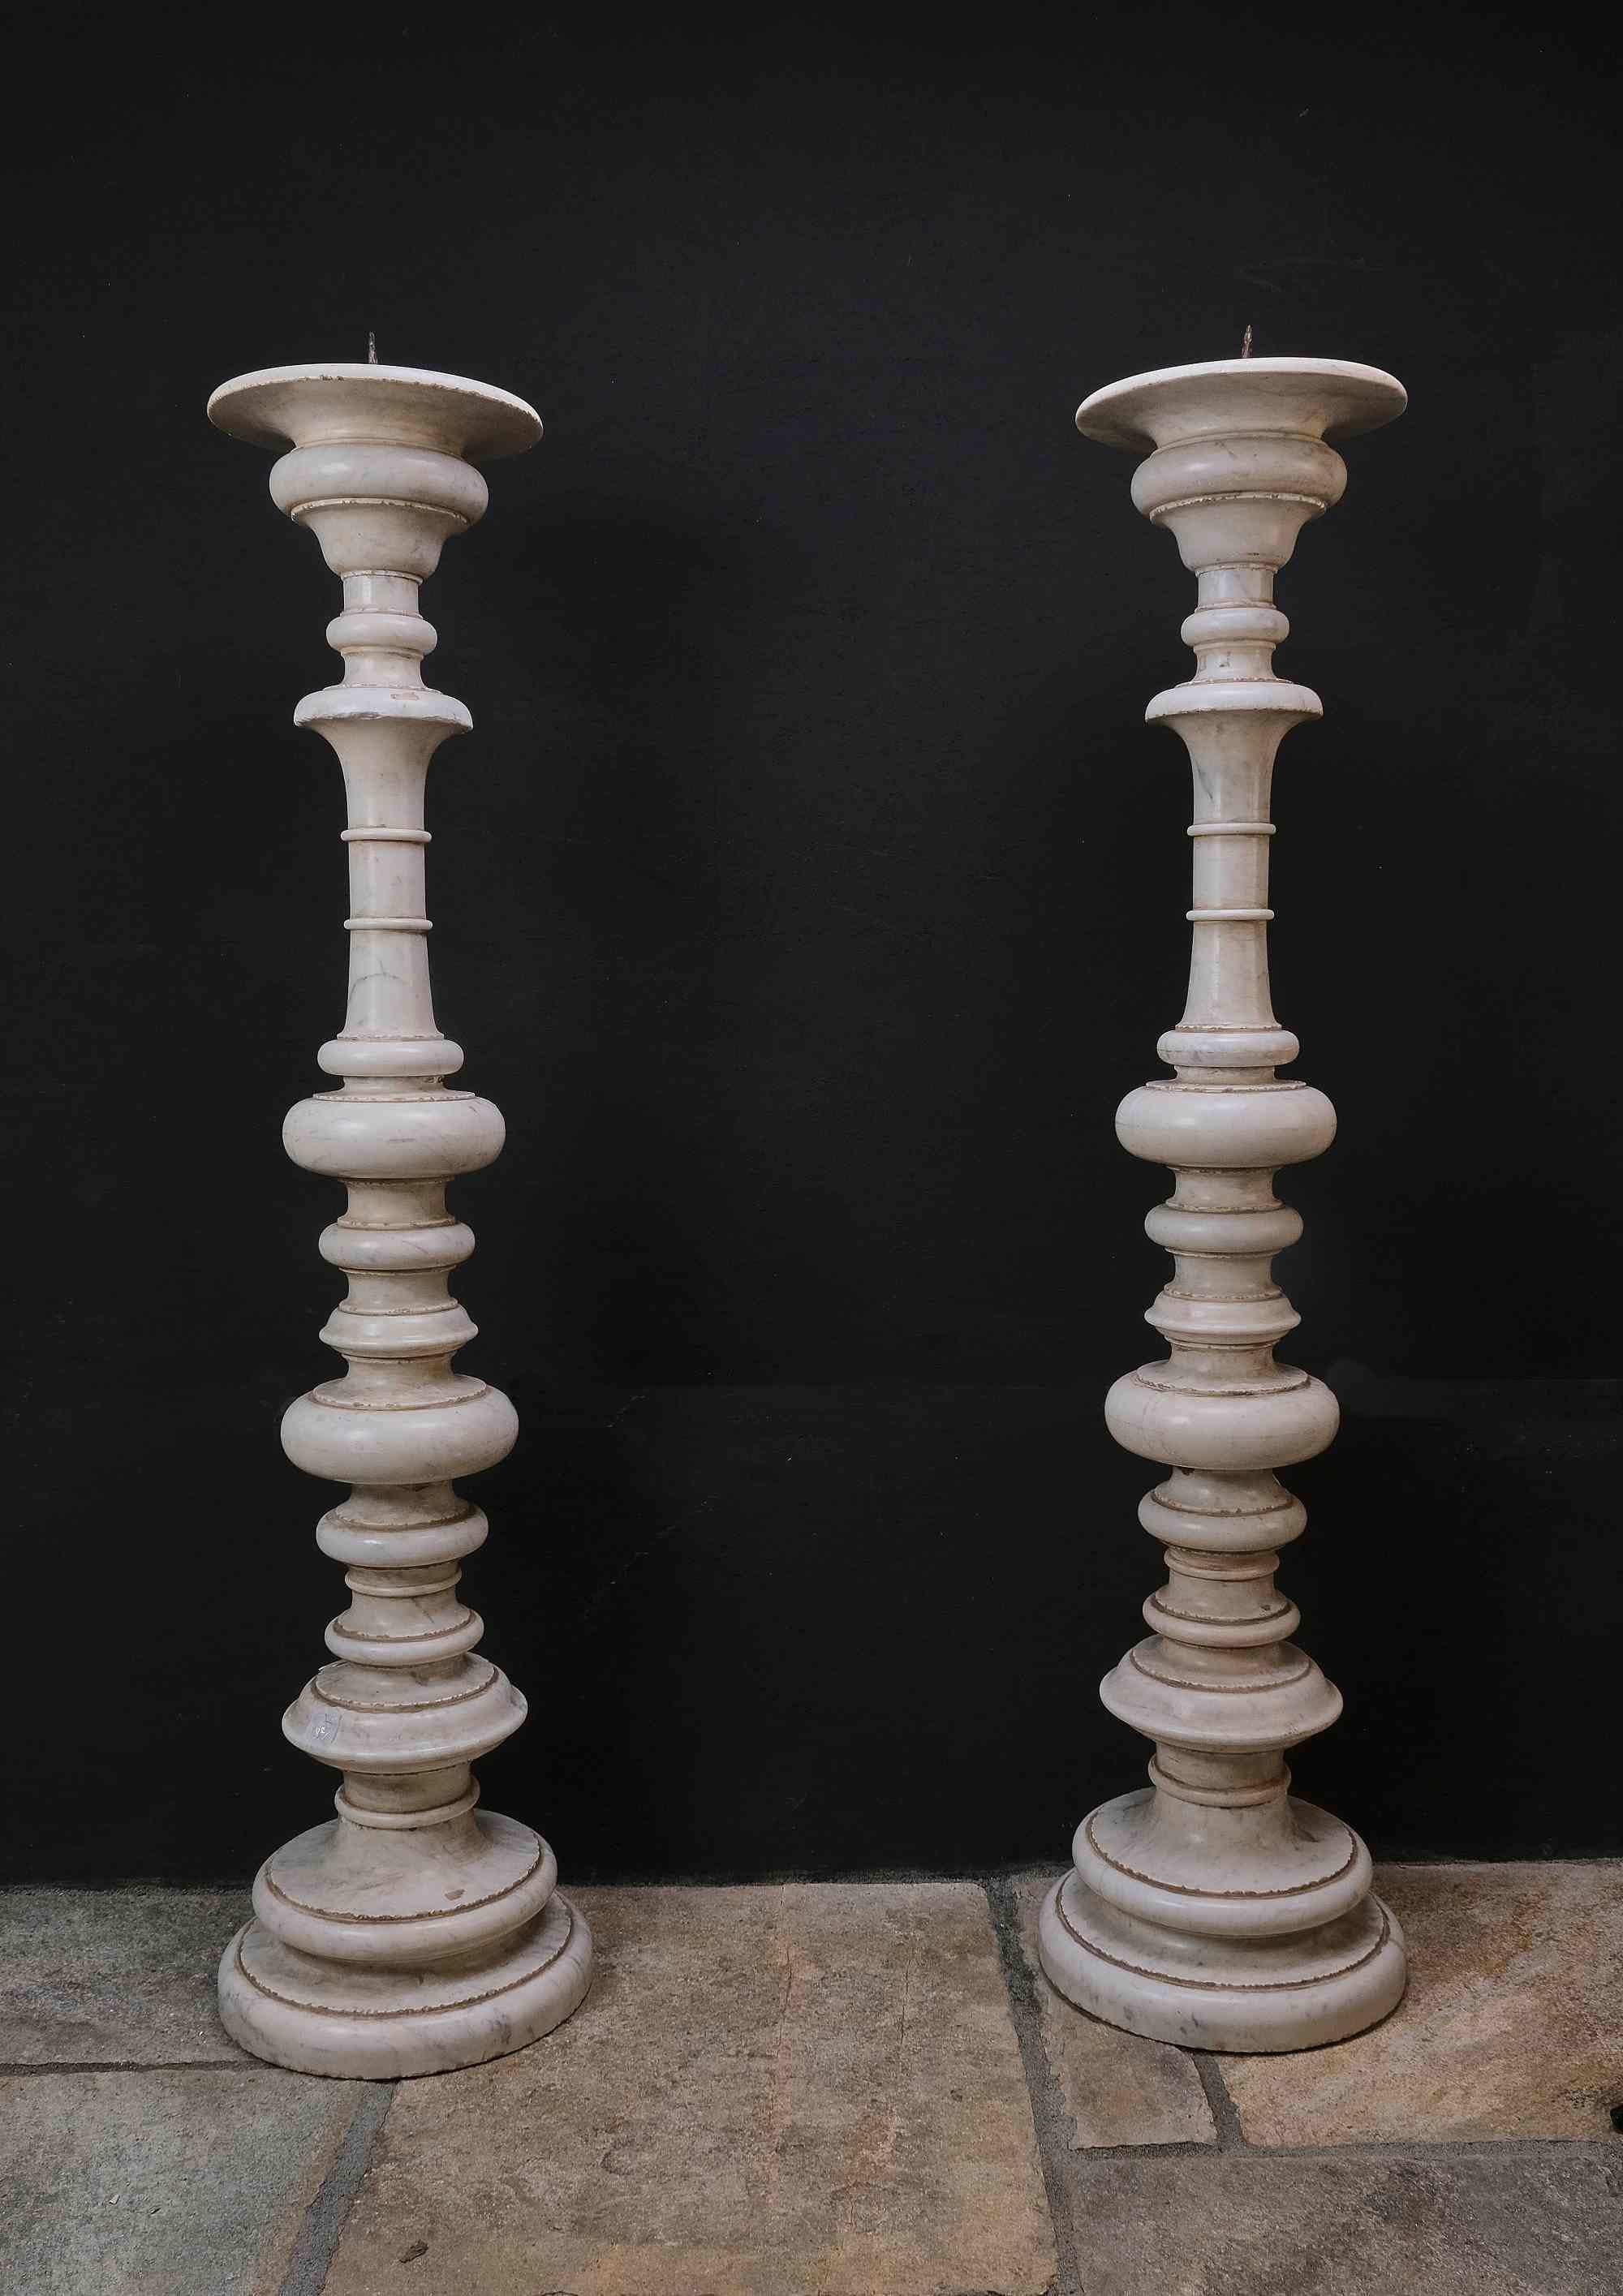 Pair of Monumental Carrara Marble Candlesticks, Rome, 17th Century For Sale 1